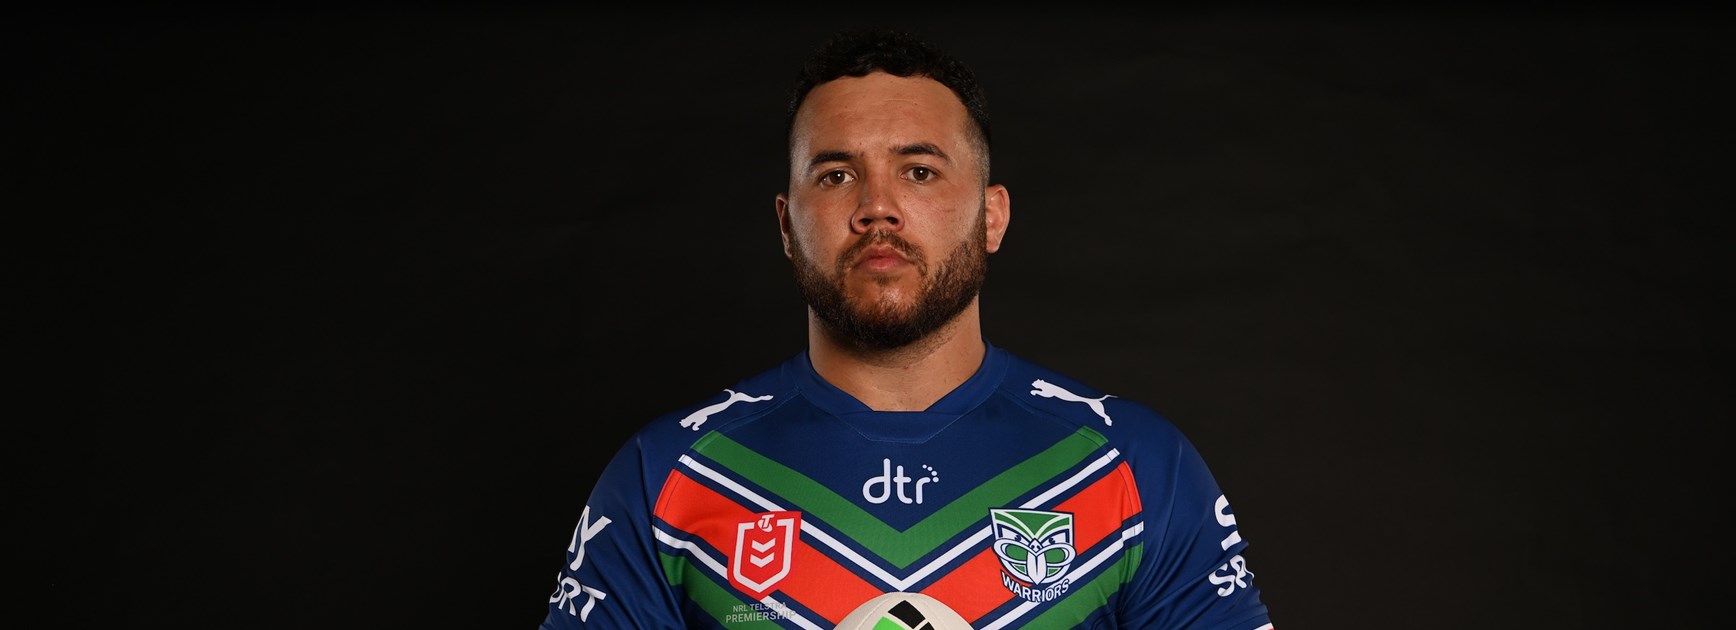 Team update: Tevaga comes in to start against Storm